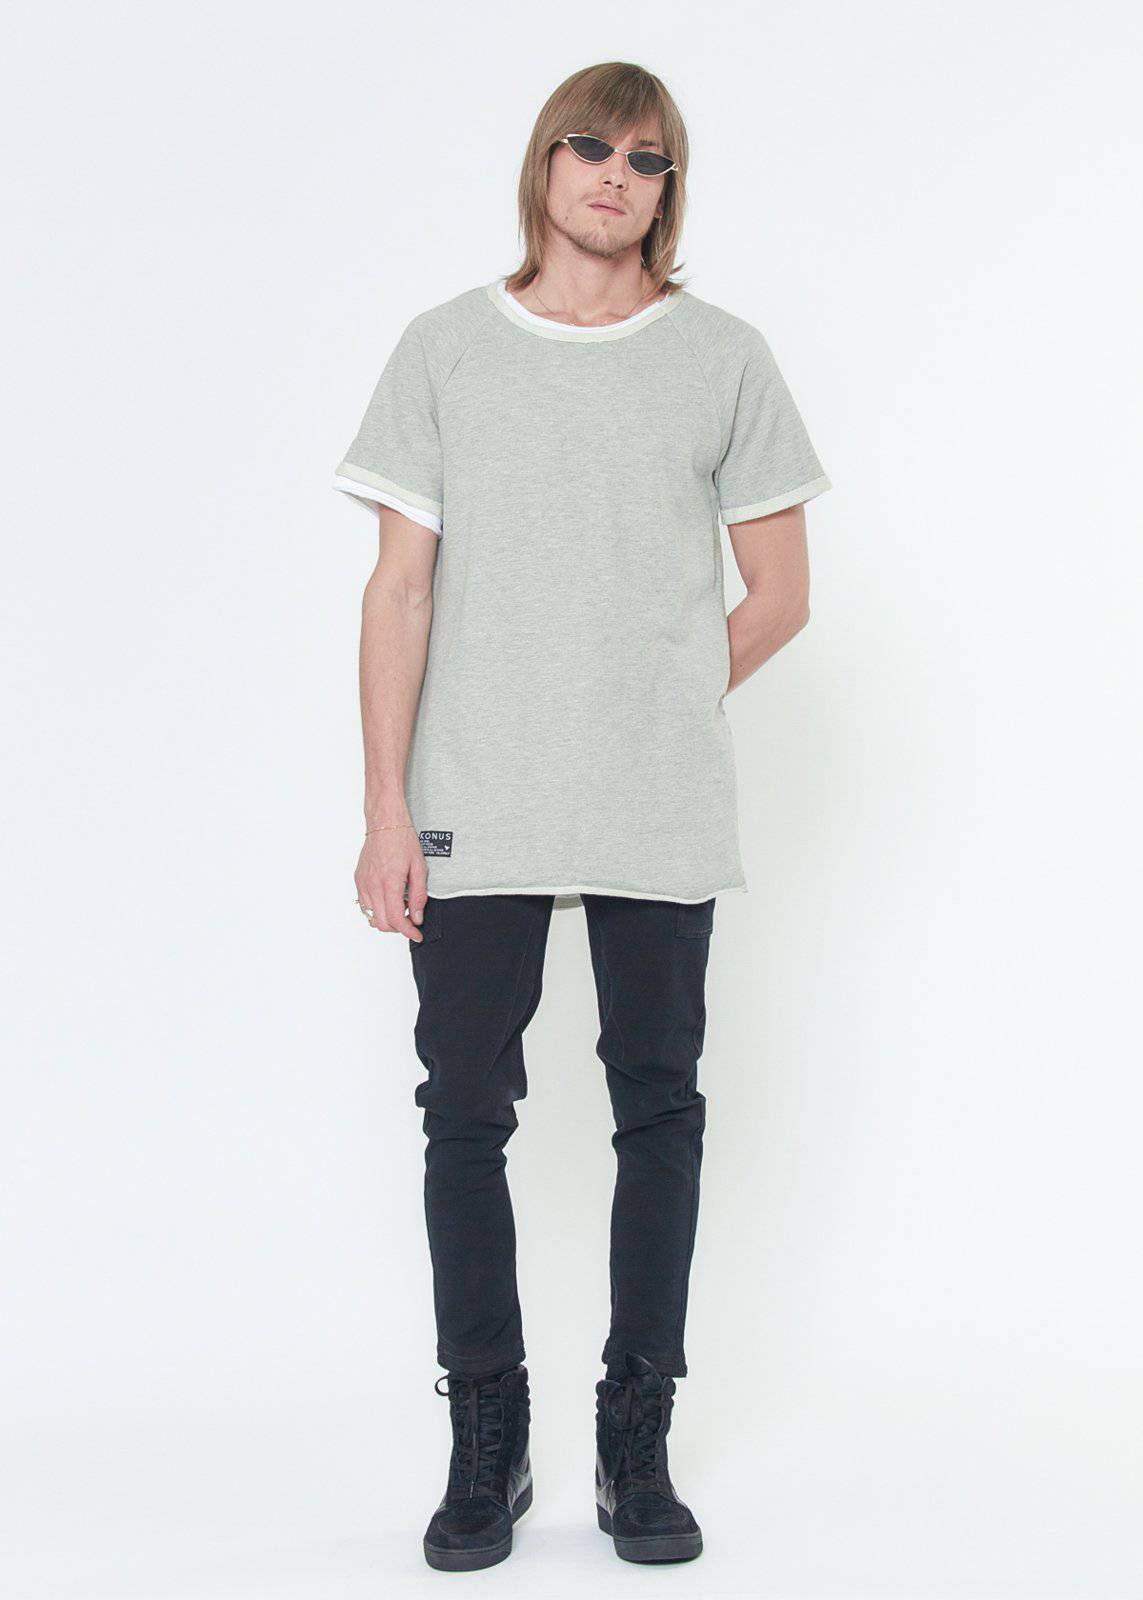 Konus Men's Layered Short Sleeve French Terry Tee in Gray by Shop at Konus